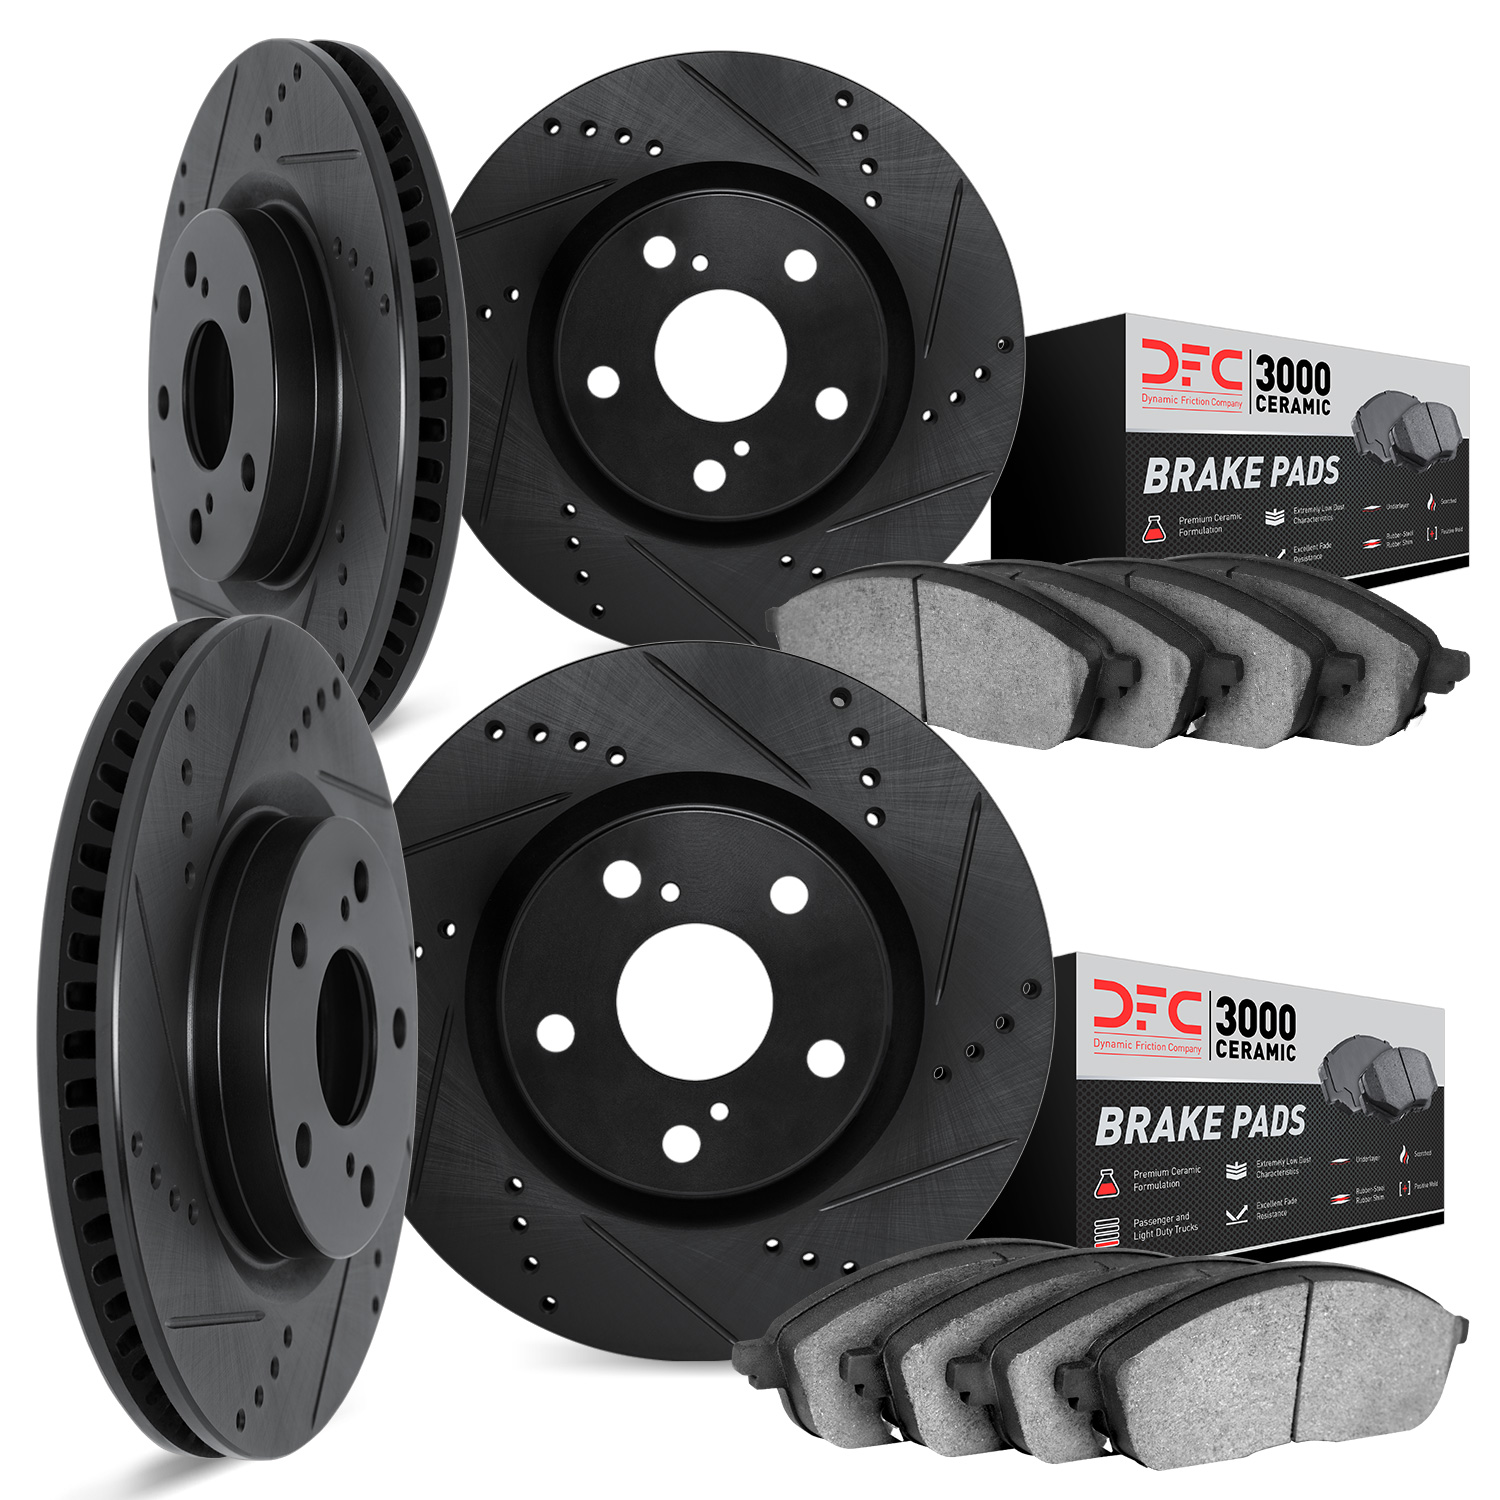 8304-39020 Drilled/Slotted Brake Rotors with 3000-Series Ceramic Brake Pads Kit [Black], 2006-2014 Mopar, Position: Front and Re